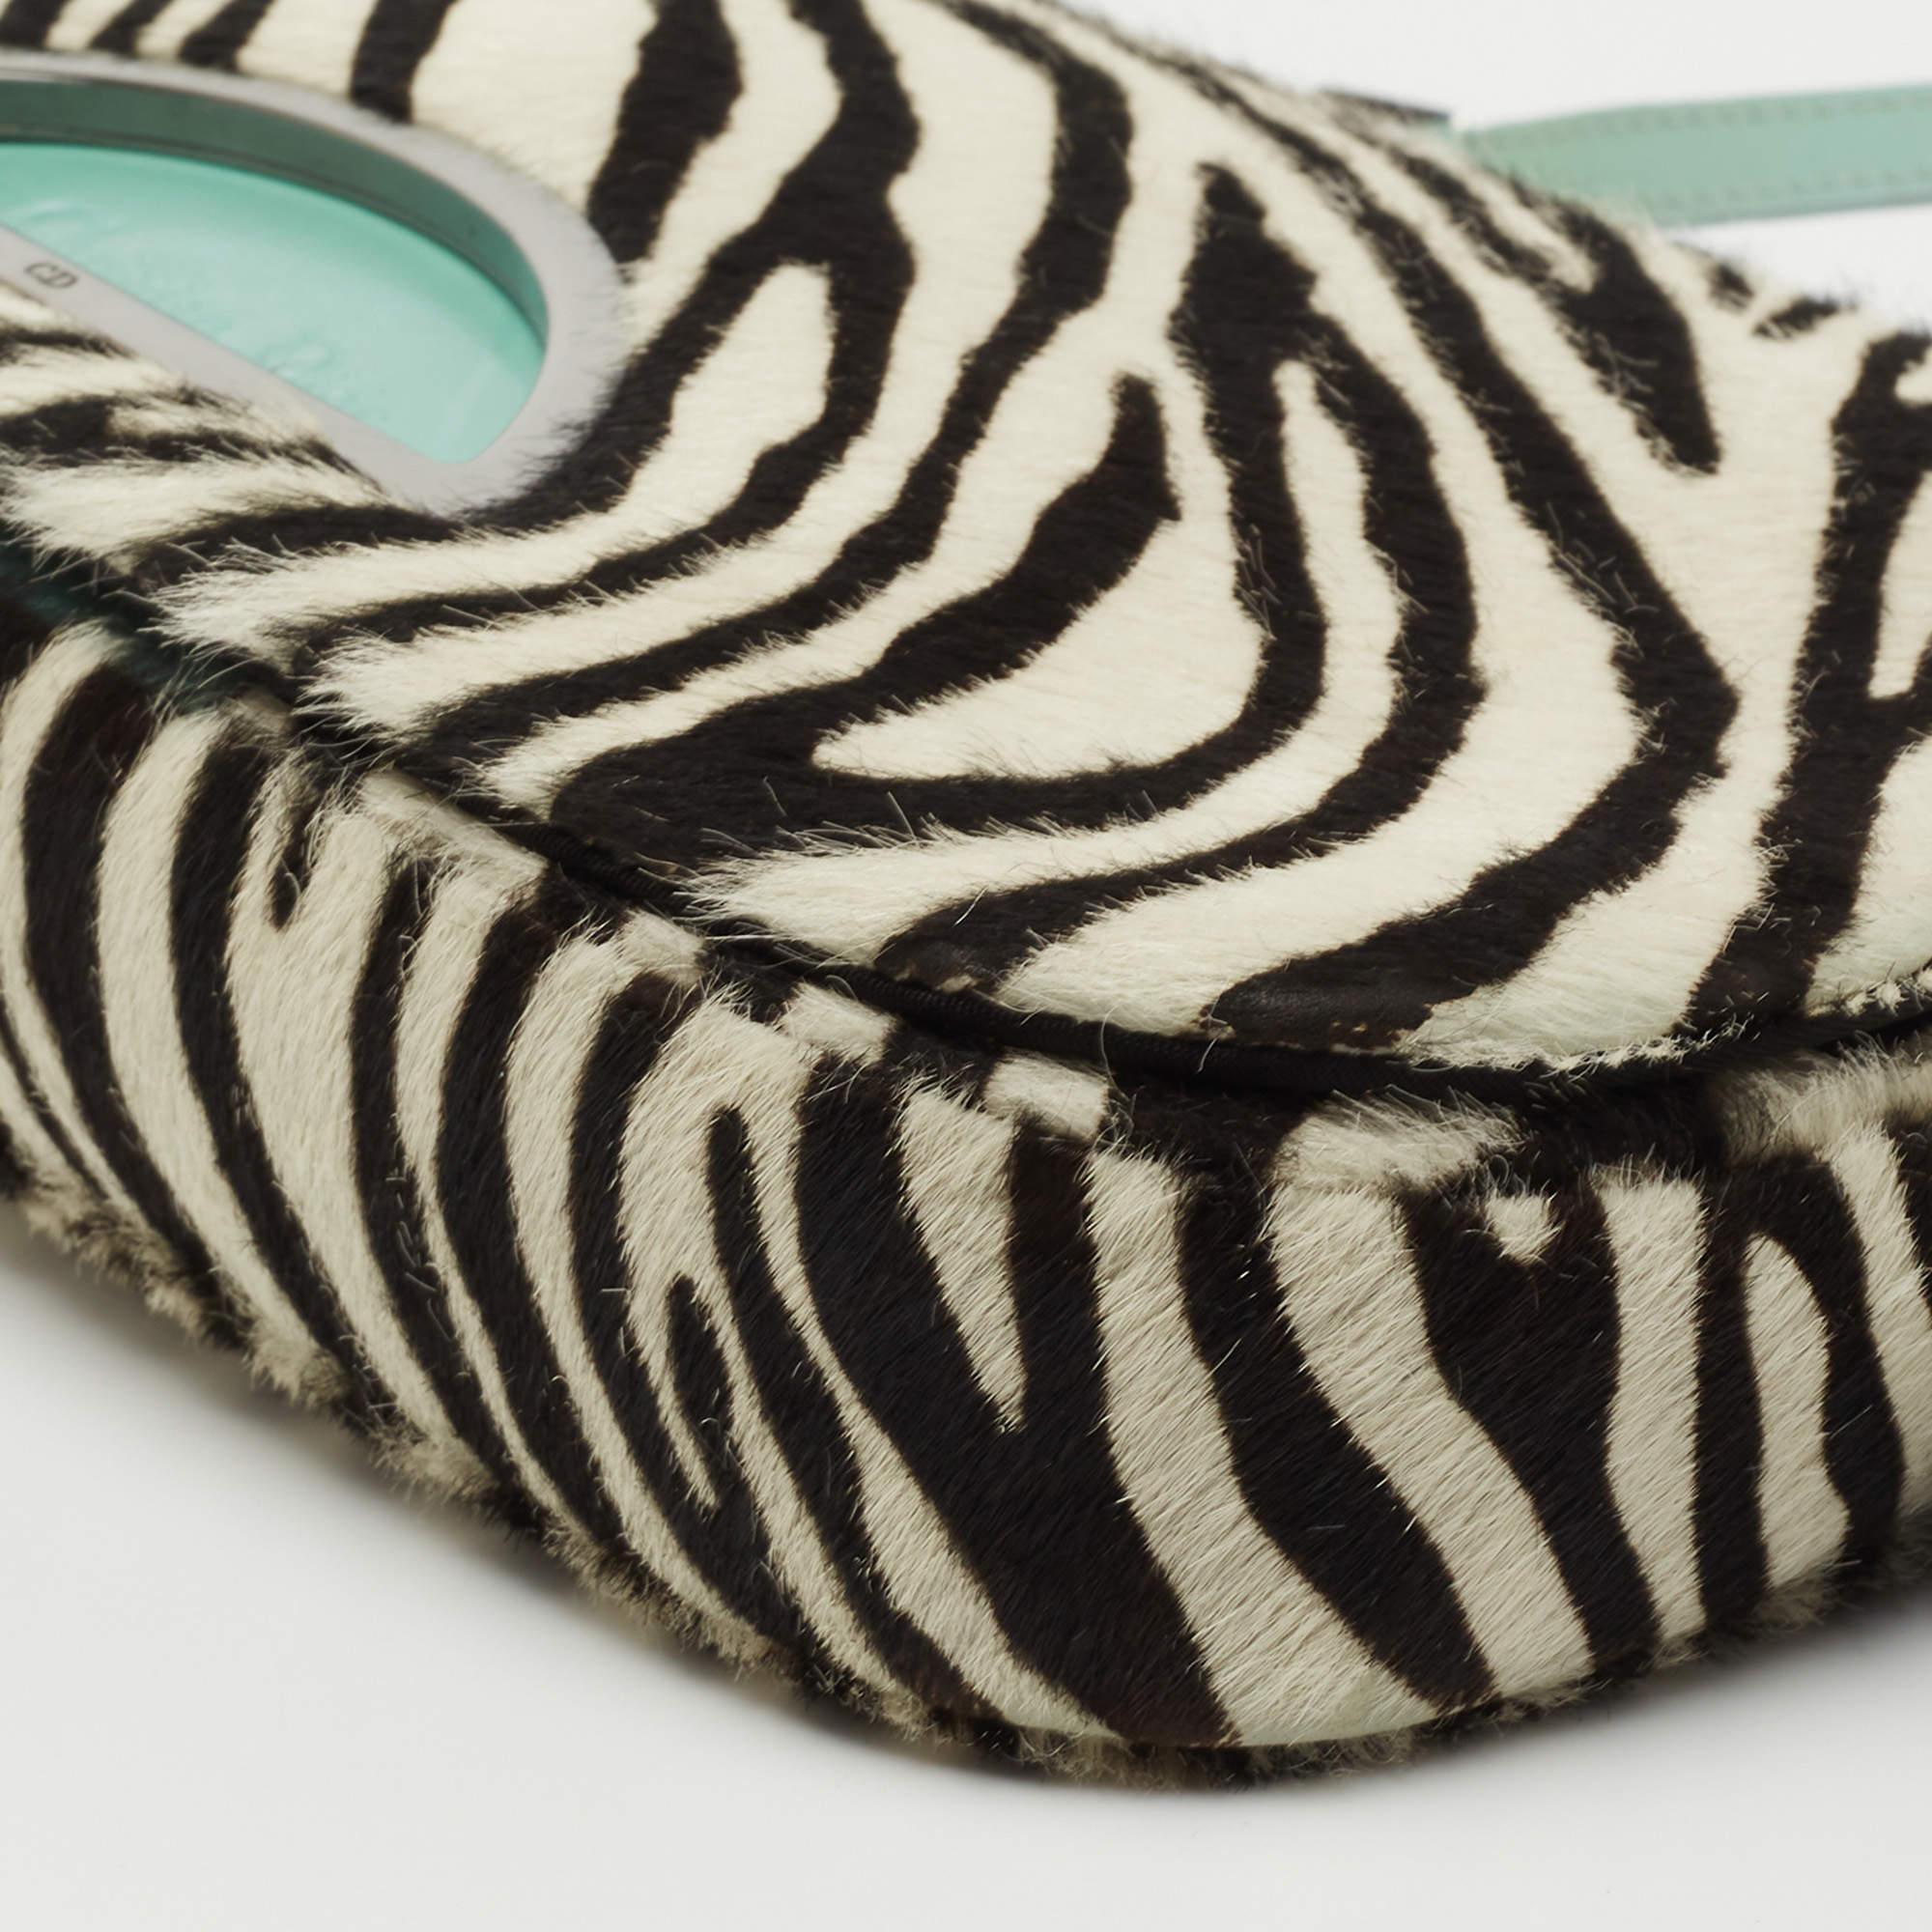 Dior Tricolor Zebra Print Calfhair and Patent Leather Malice Shoulder Bag 4